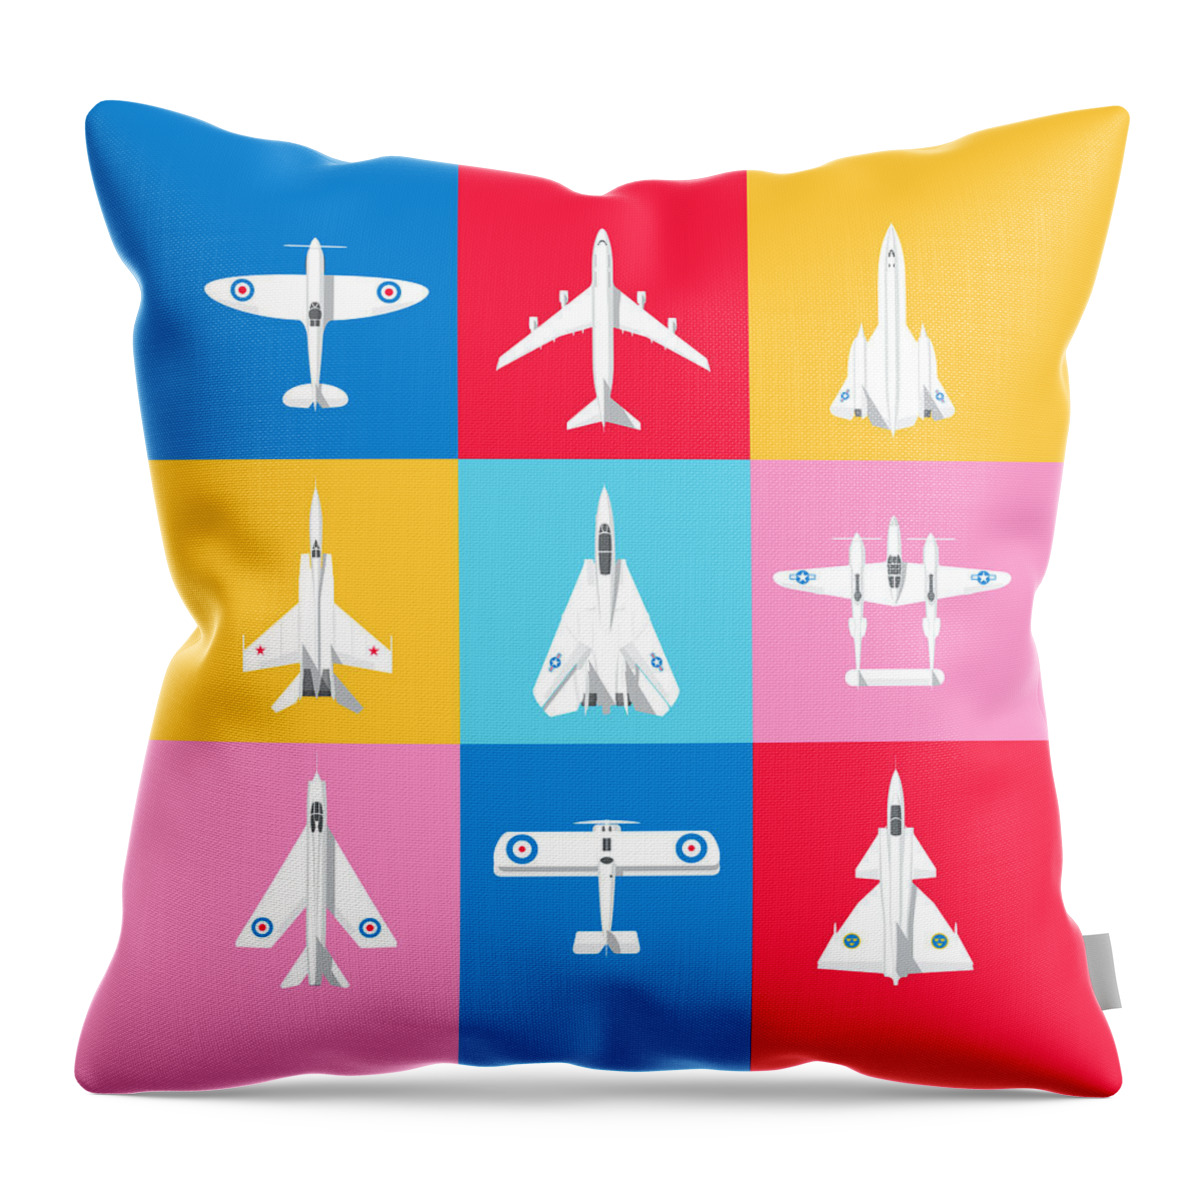 Airplane Throw Pillow featuring the digital art Classic Iconic Aircraft Pattern - International by Organic Synthesis